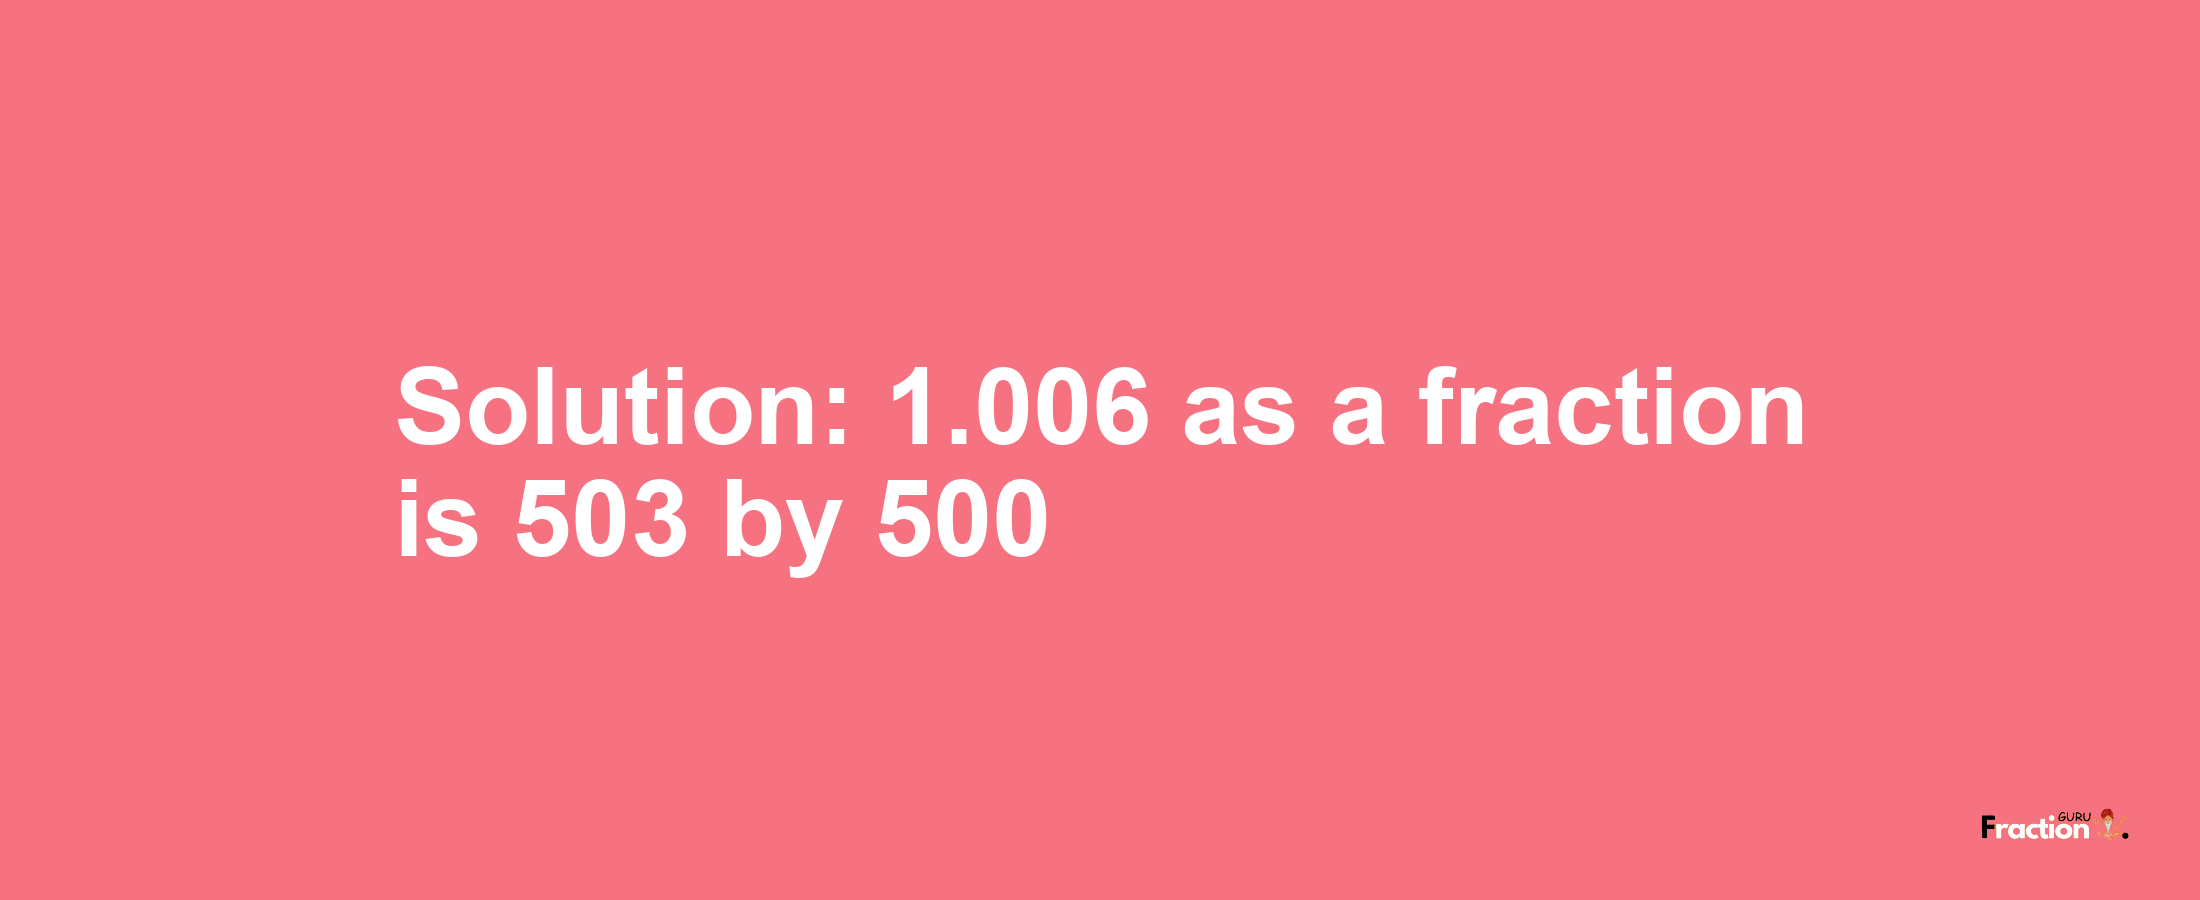 Solution:1.006 as a fraction is 503/500